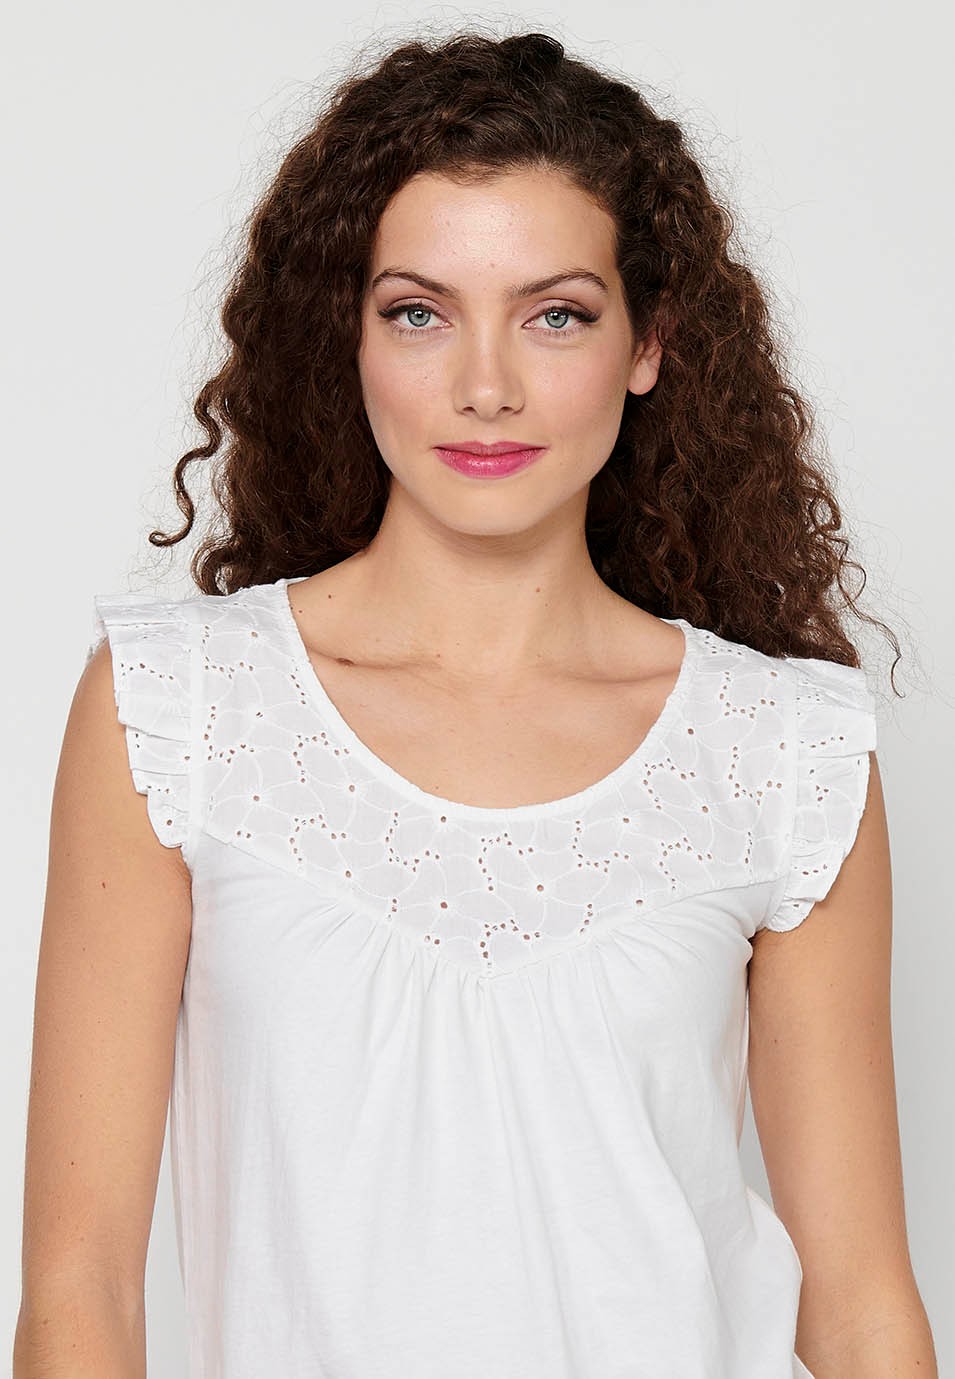 Women's White Round Neck Short Sleeve T-shirt with Ruffle on the Shoulders 8